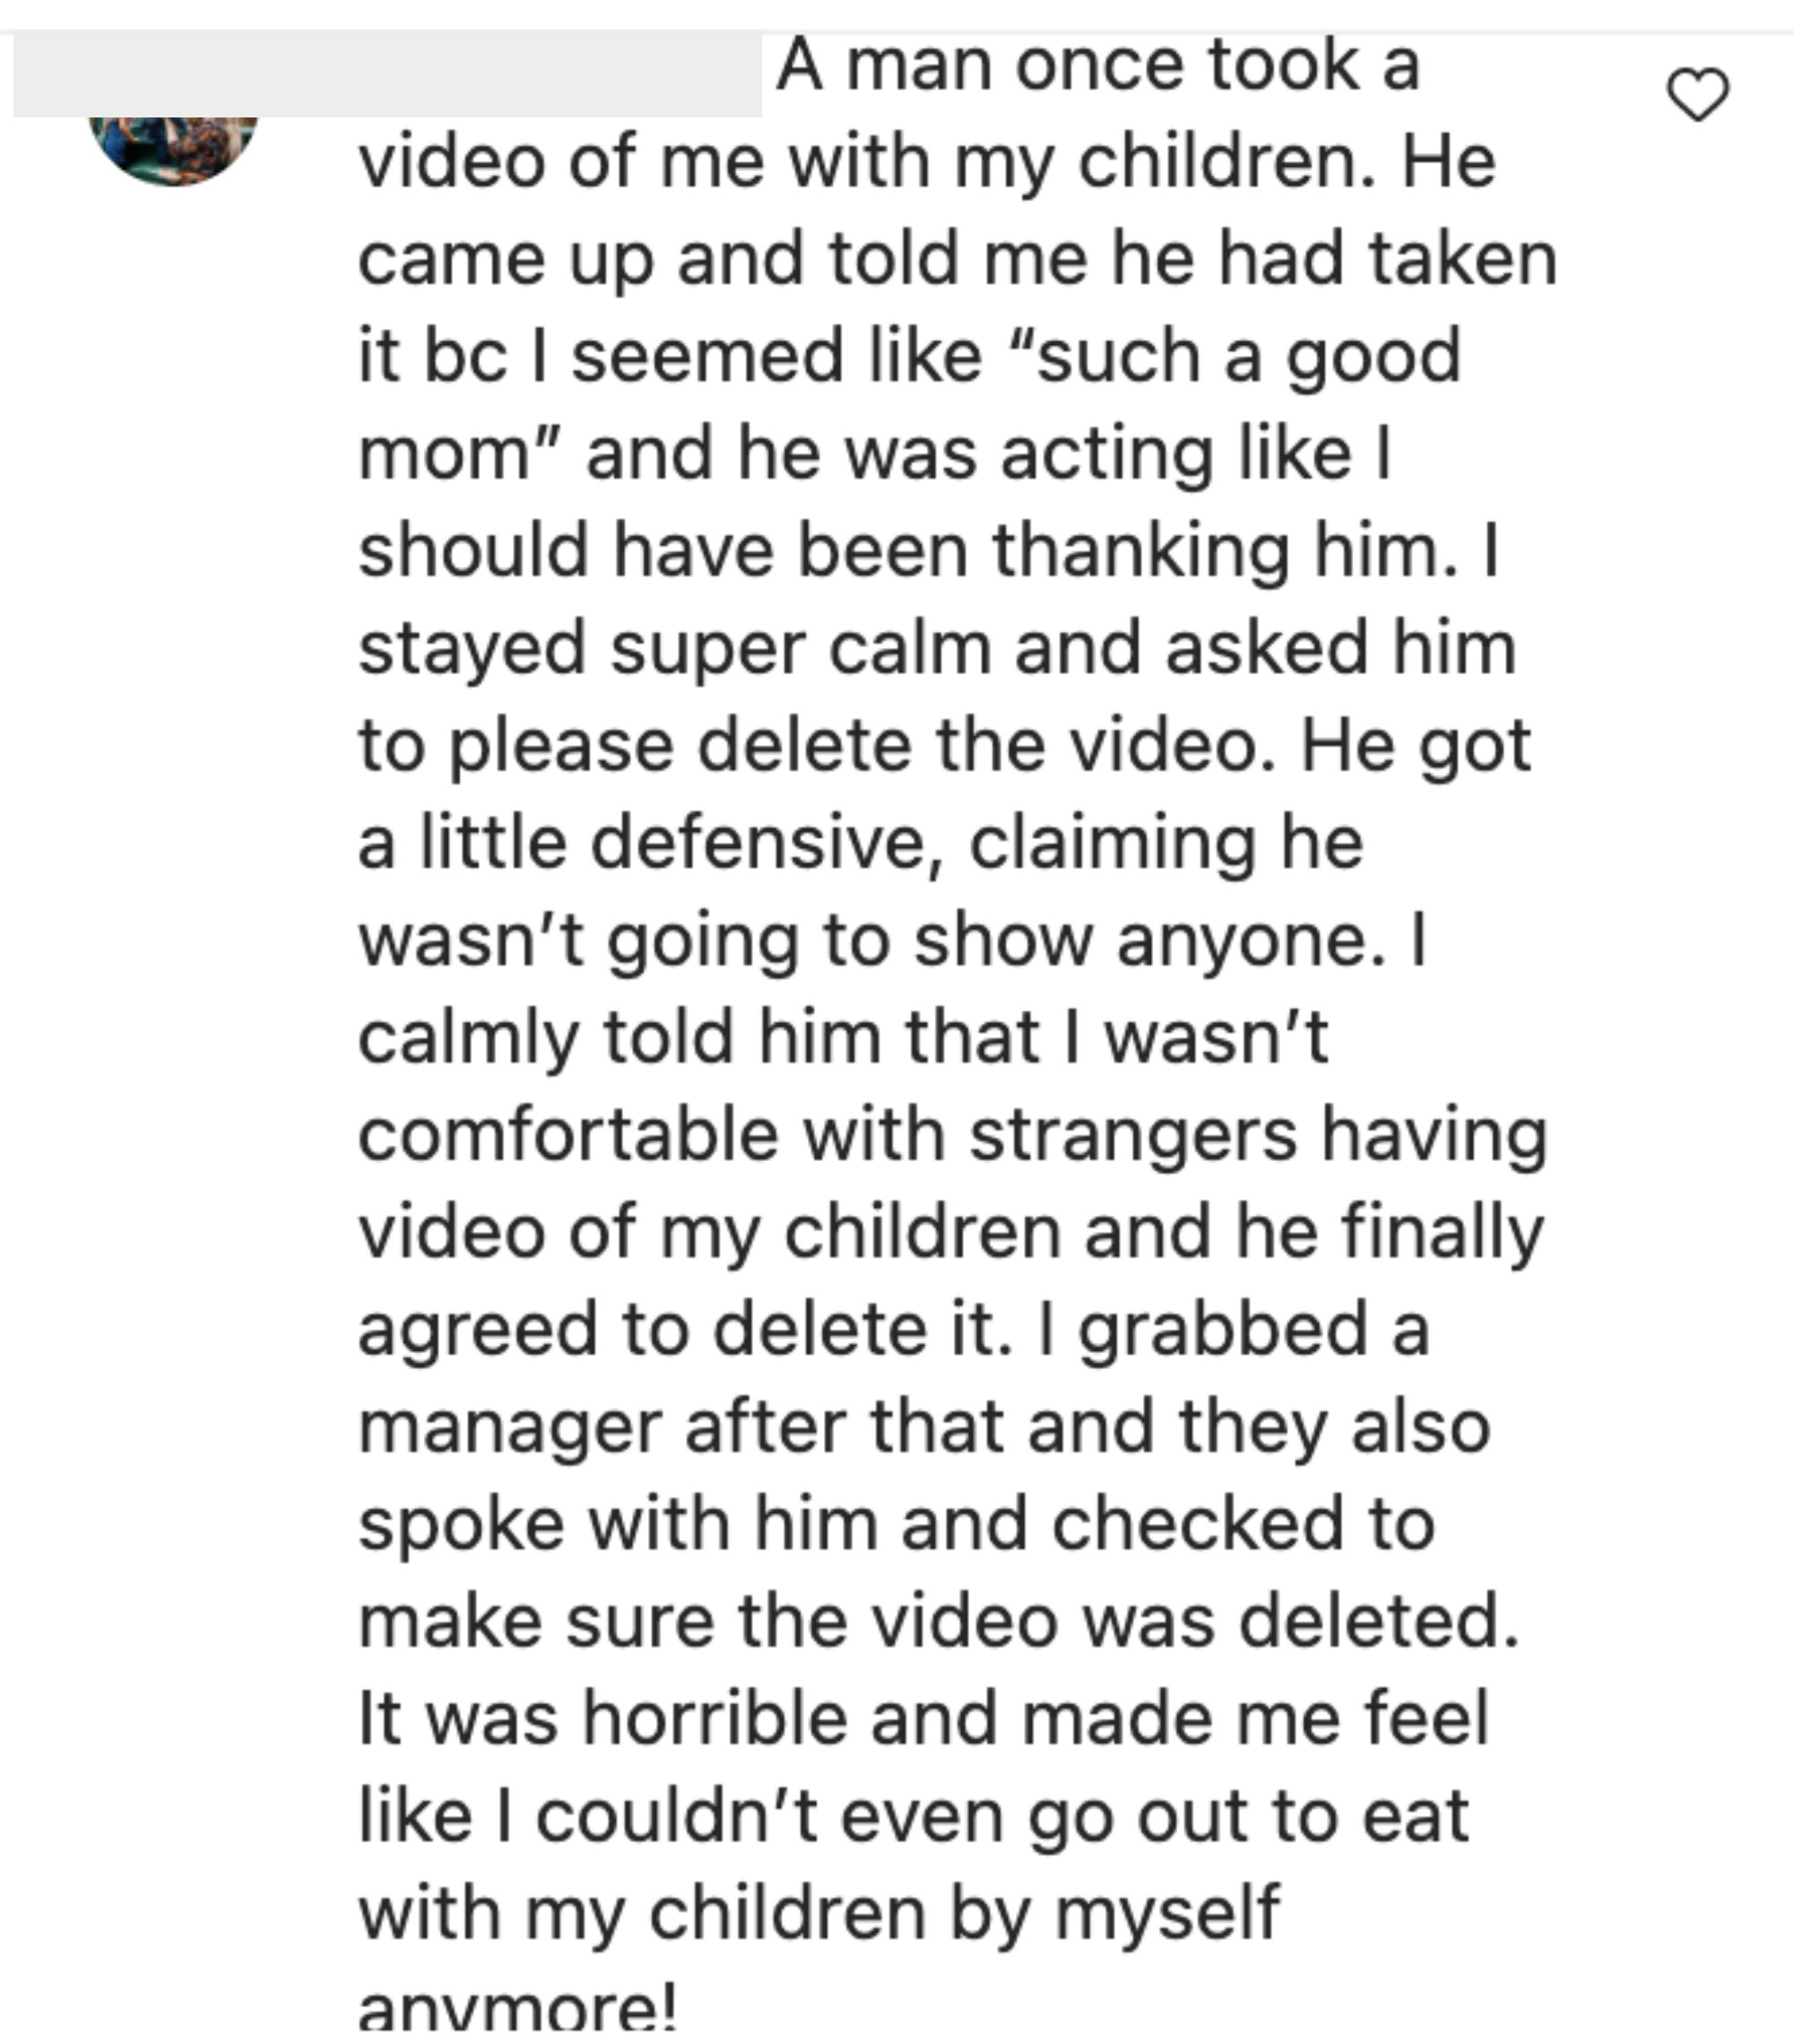 A mother says a man took unwanted video of her with her children, and when she asked him to delete it, he became defensive and acted like she should be thanking him